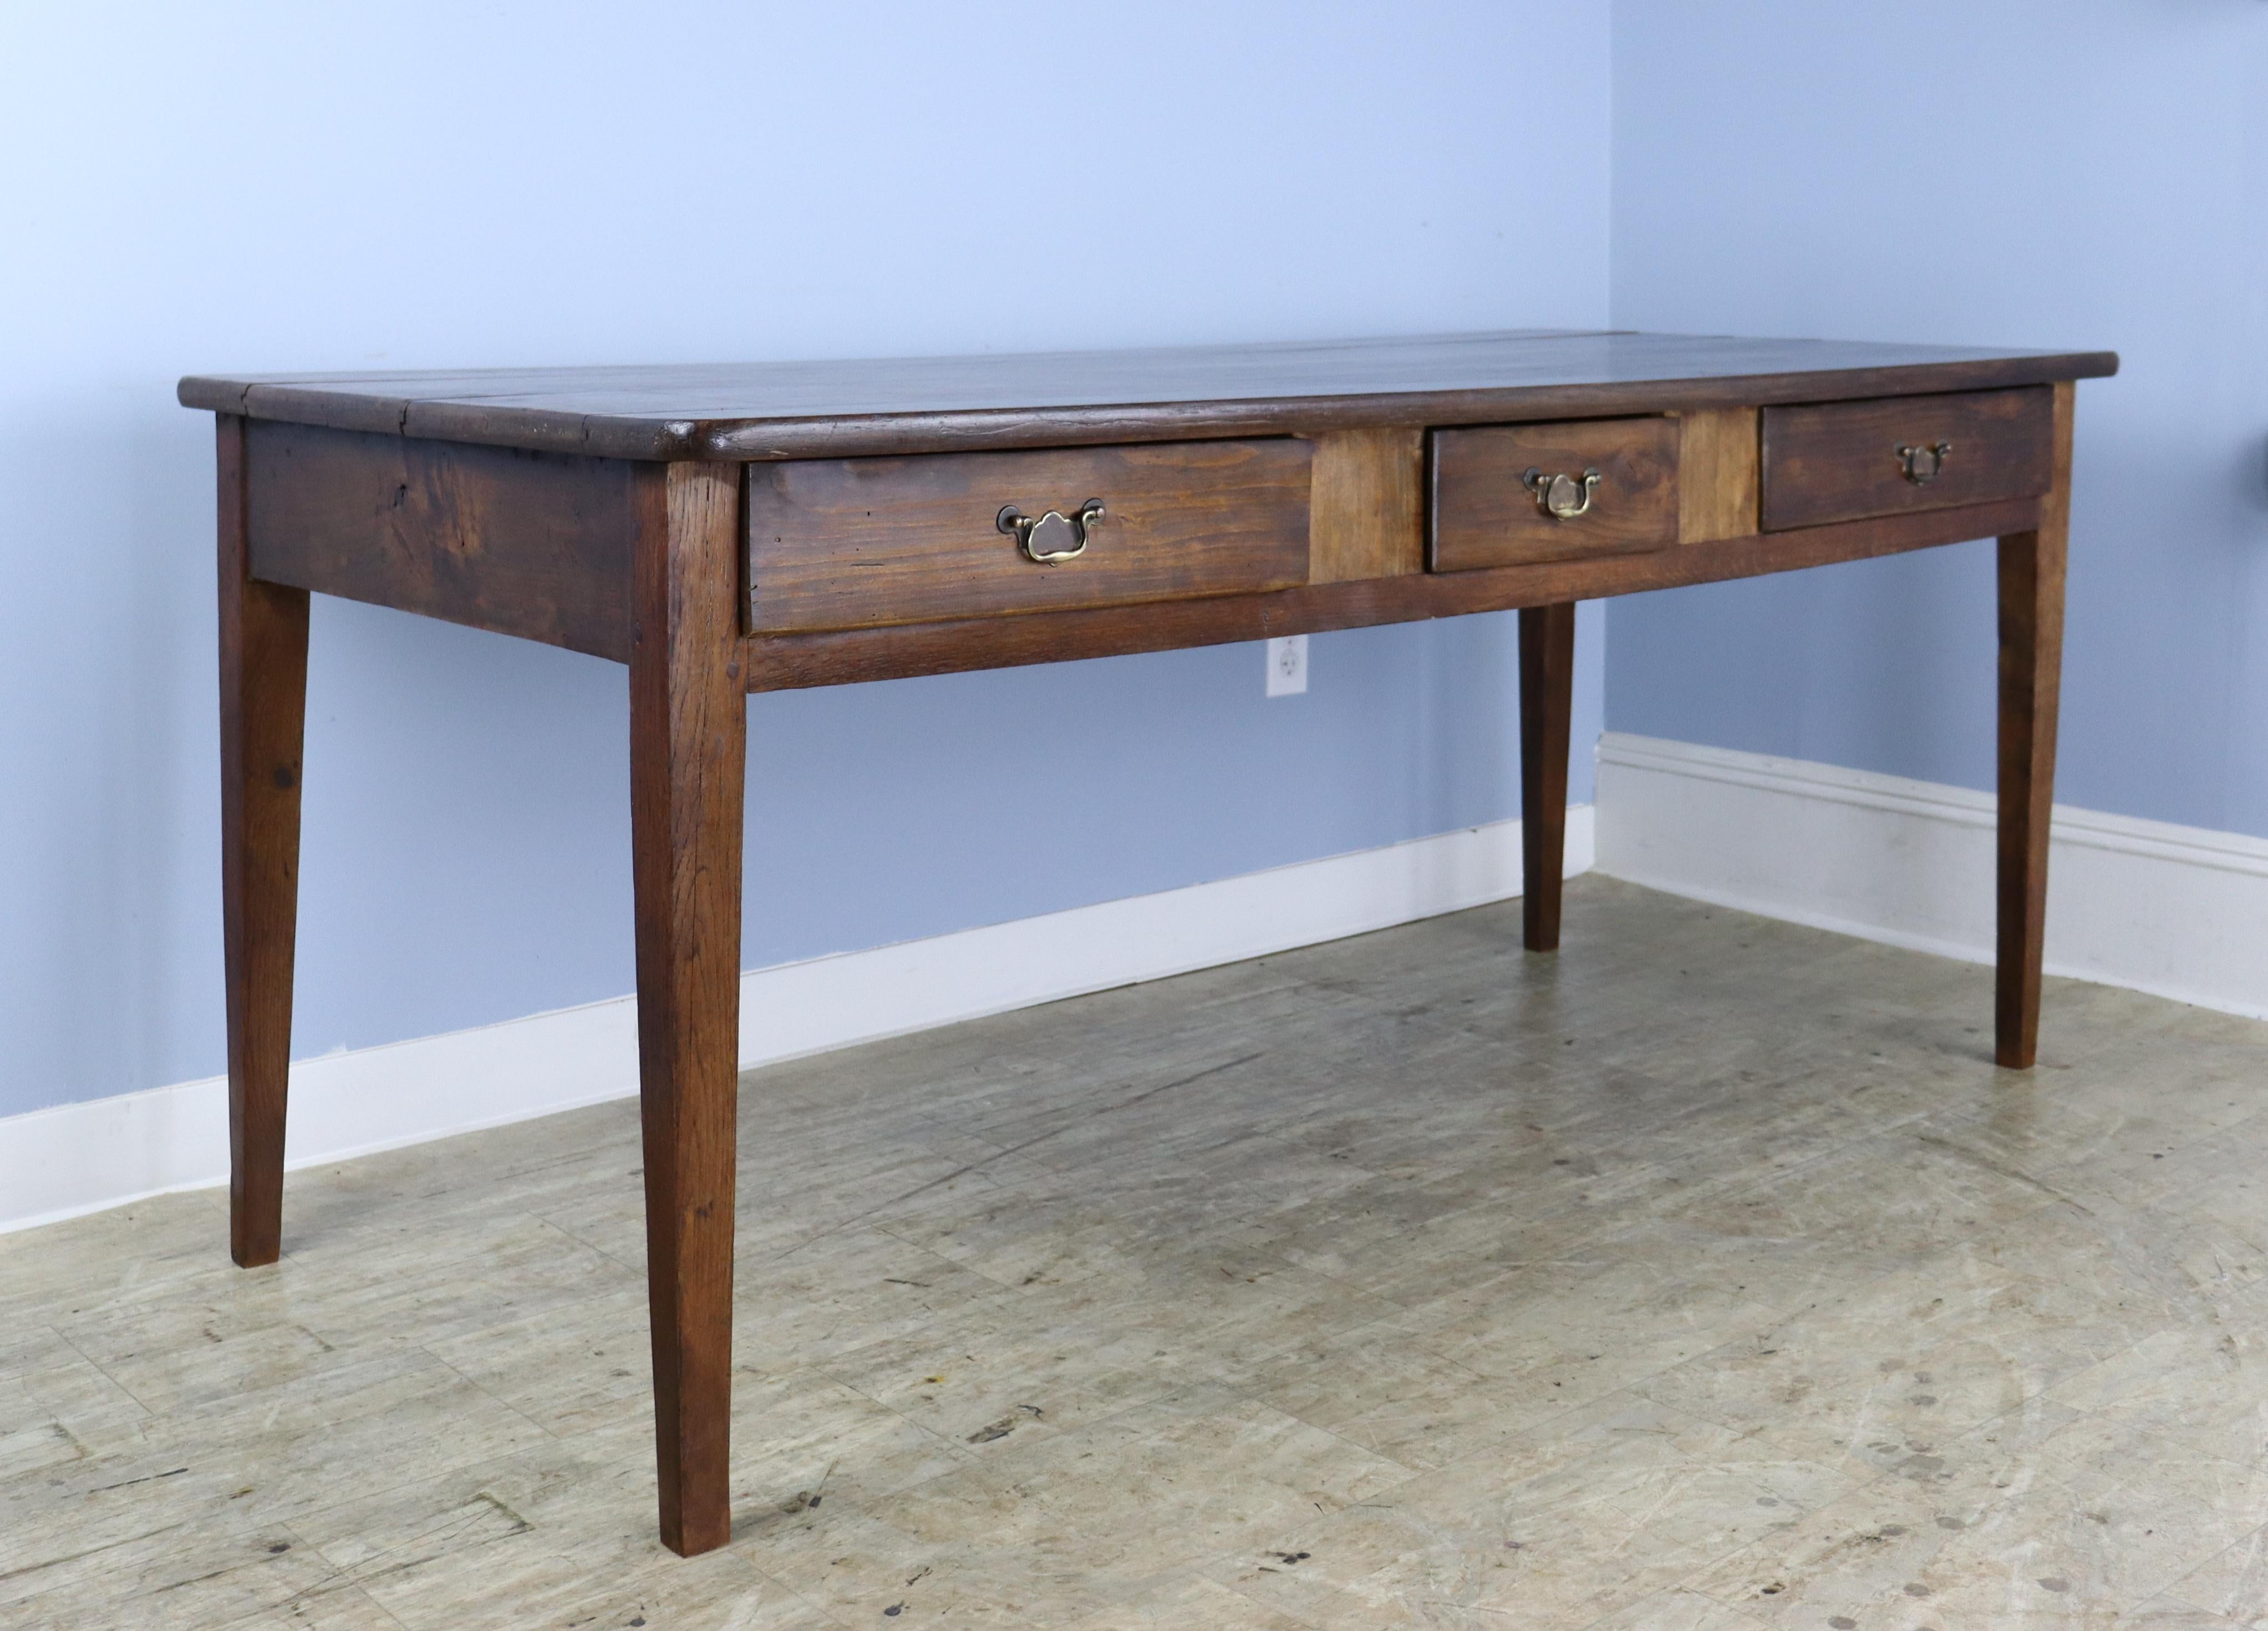 A smaller farm table or large desk with three drawers in rich chestnut. The top has rounded corners and lovely color and grain. Tapered legs are well pegged at the apron. There are 66 inches between the legs on the long side, and the apron height is